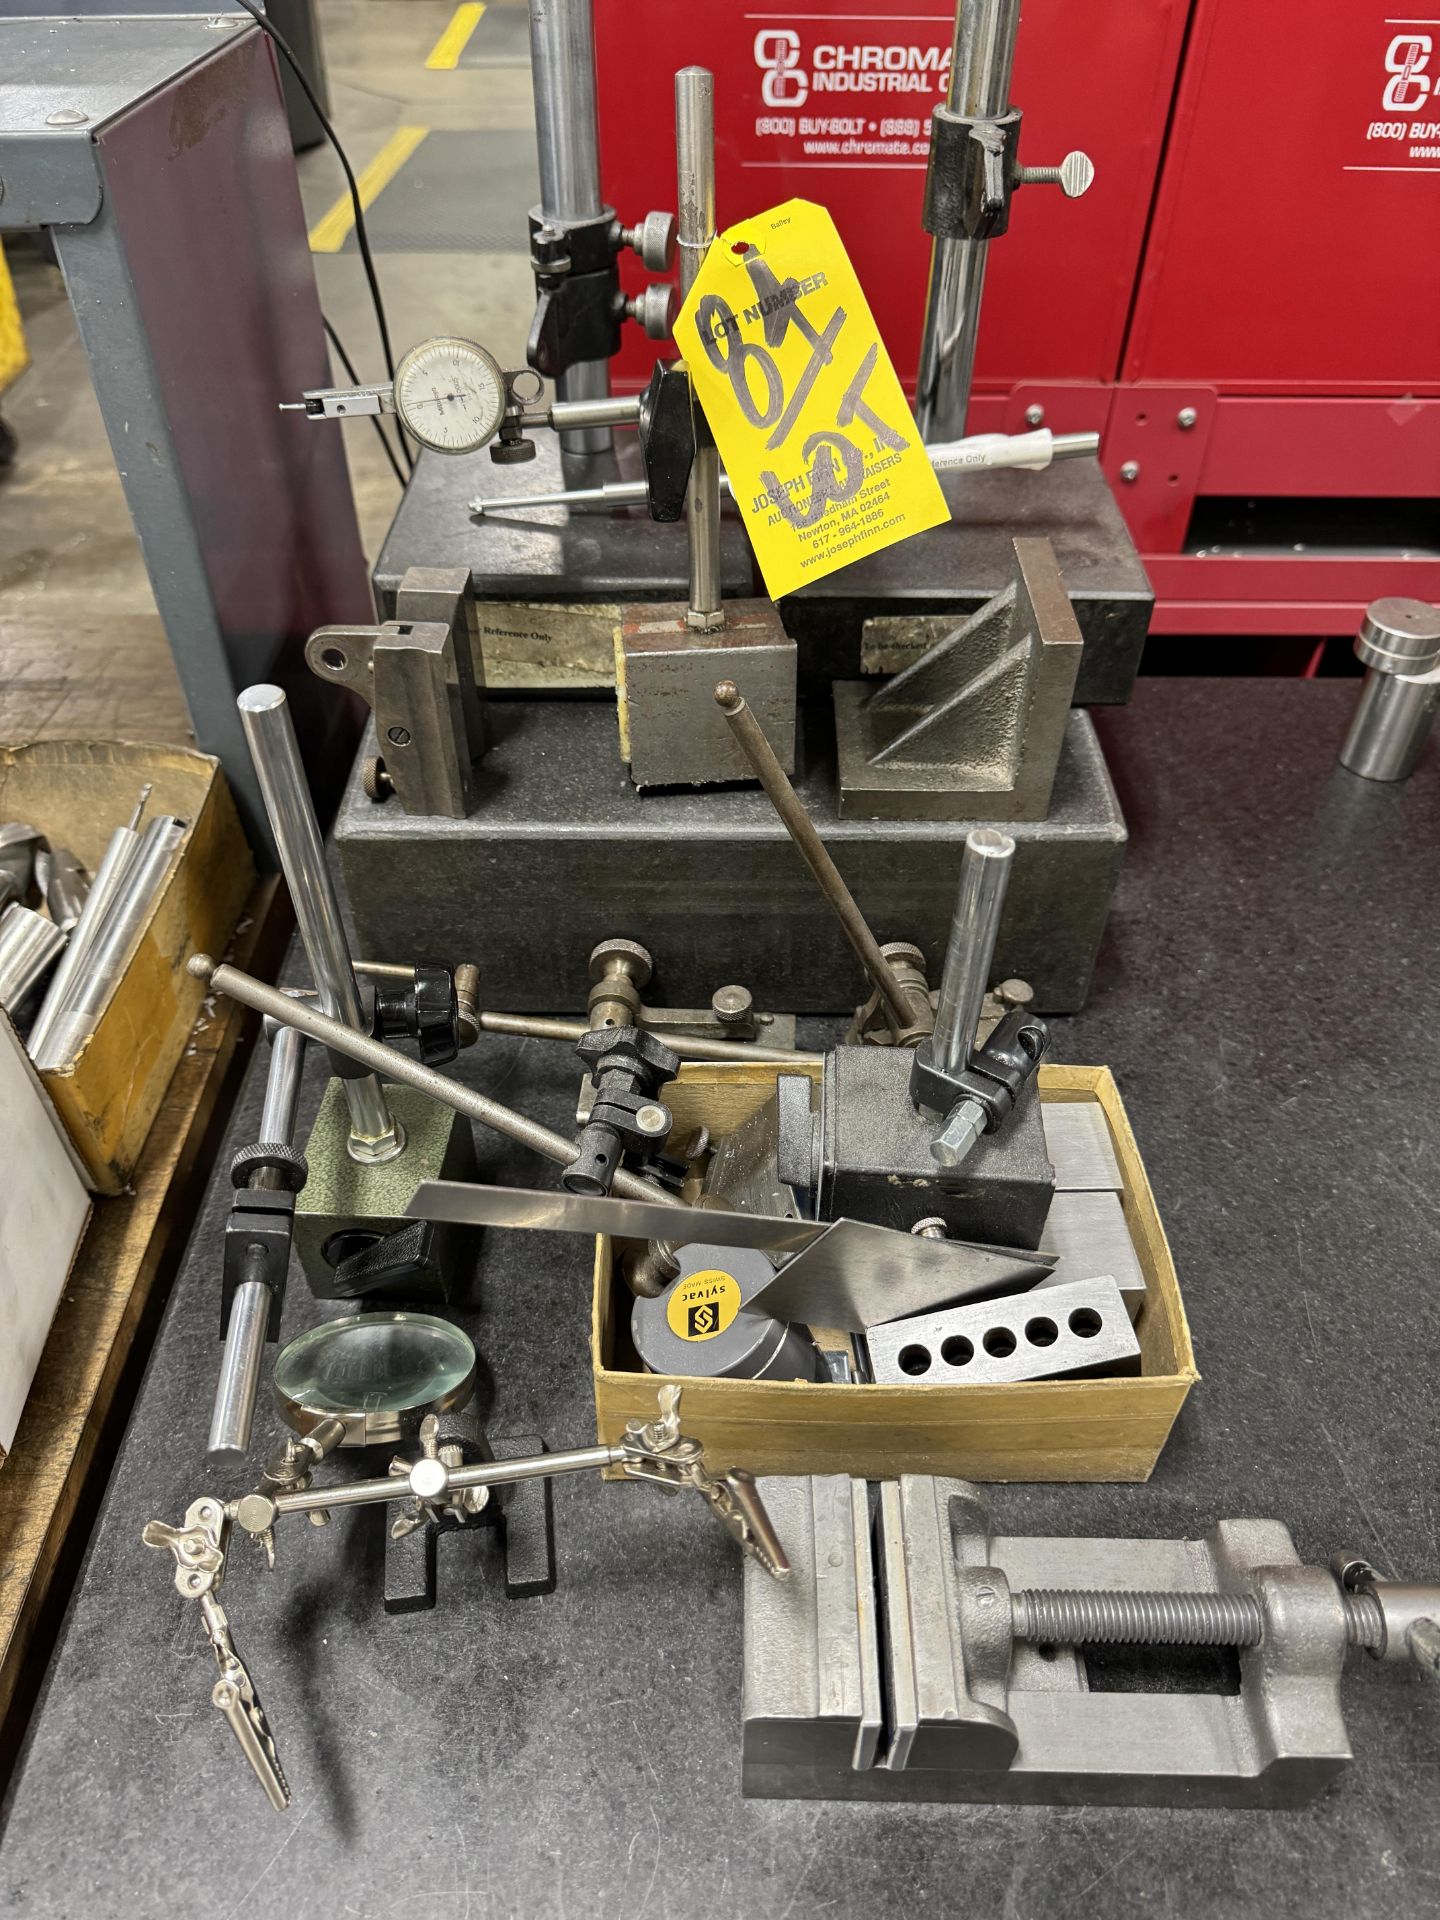 LOT 9" x 12" Granite Surface Plate, (2) Granite Dial Indicator Stands, Asst. Indicator Stands, 2.